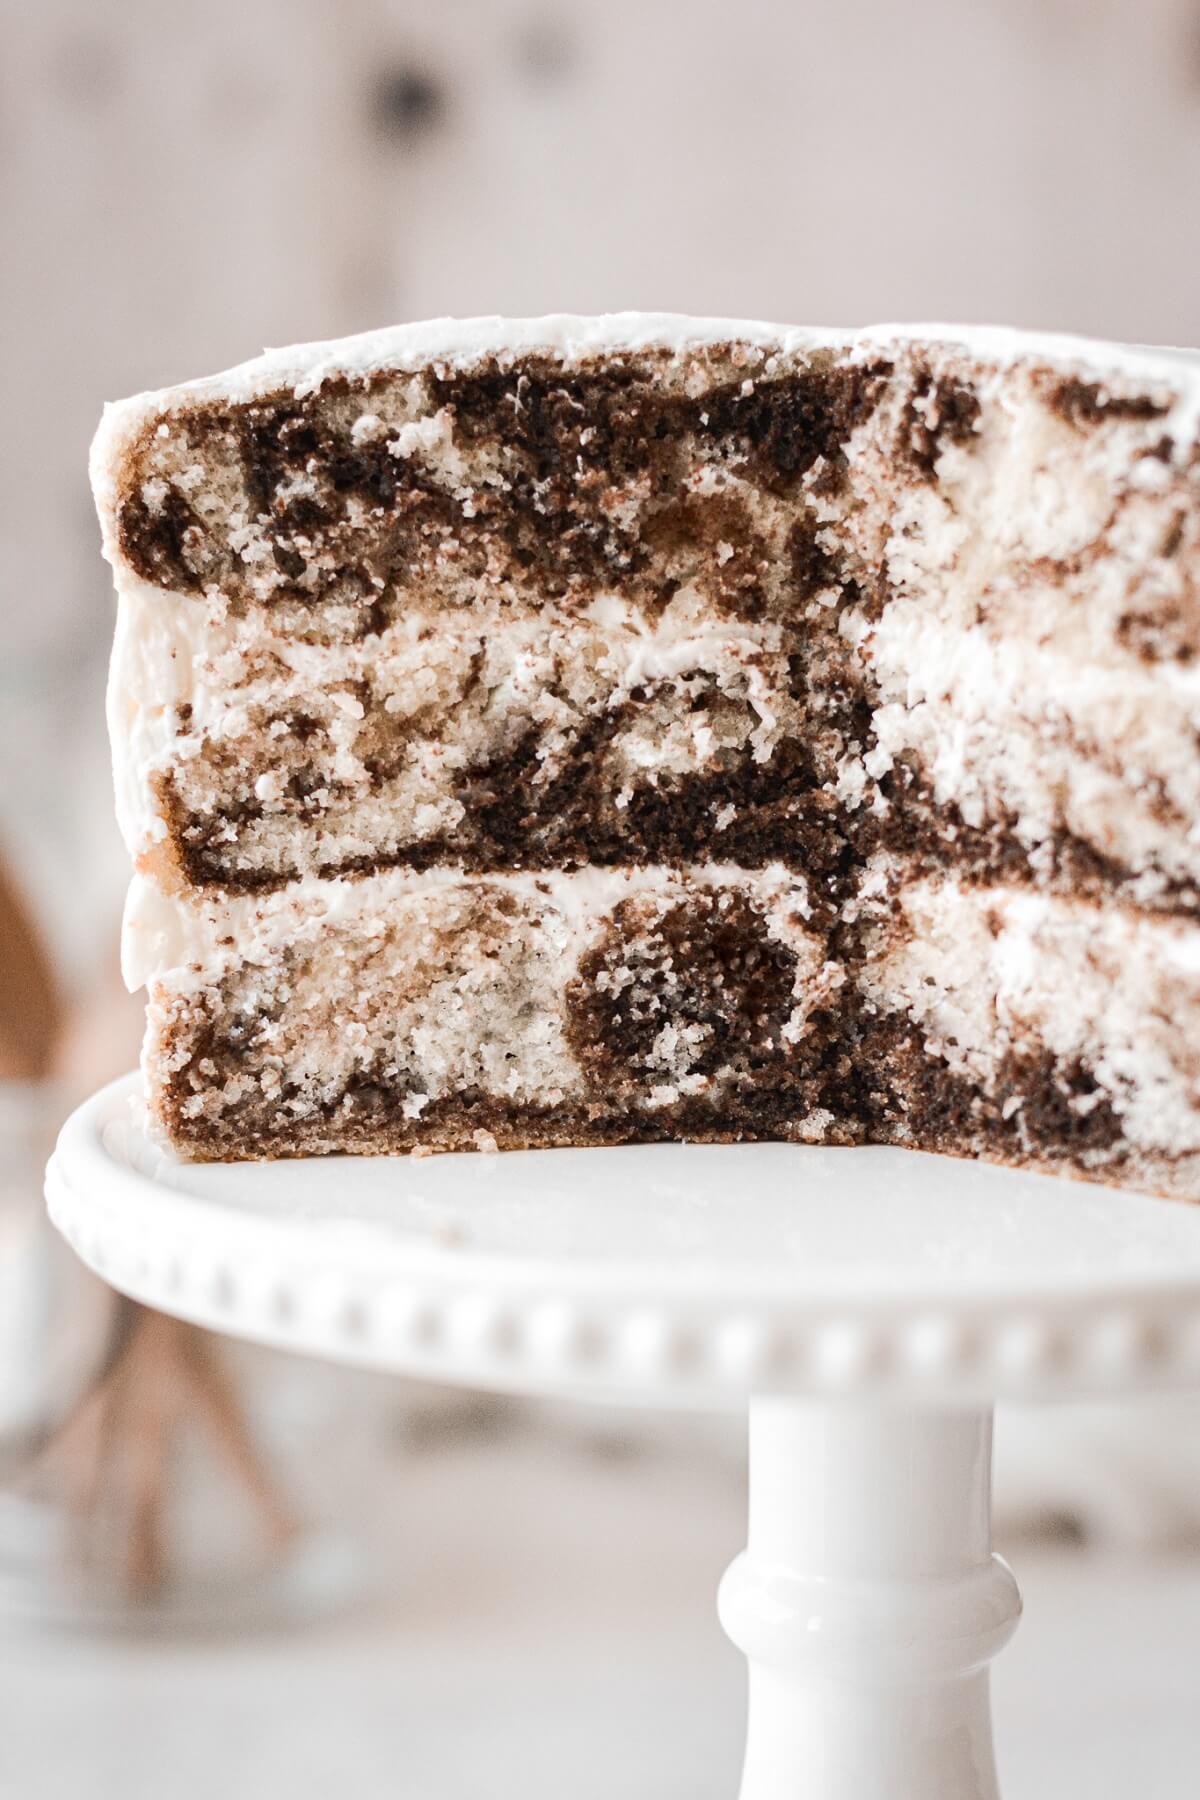 Inside layers of a marble cake.